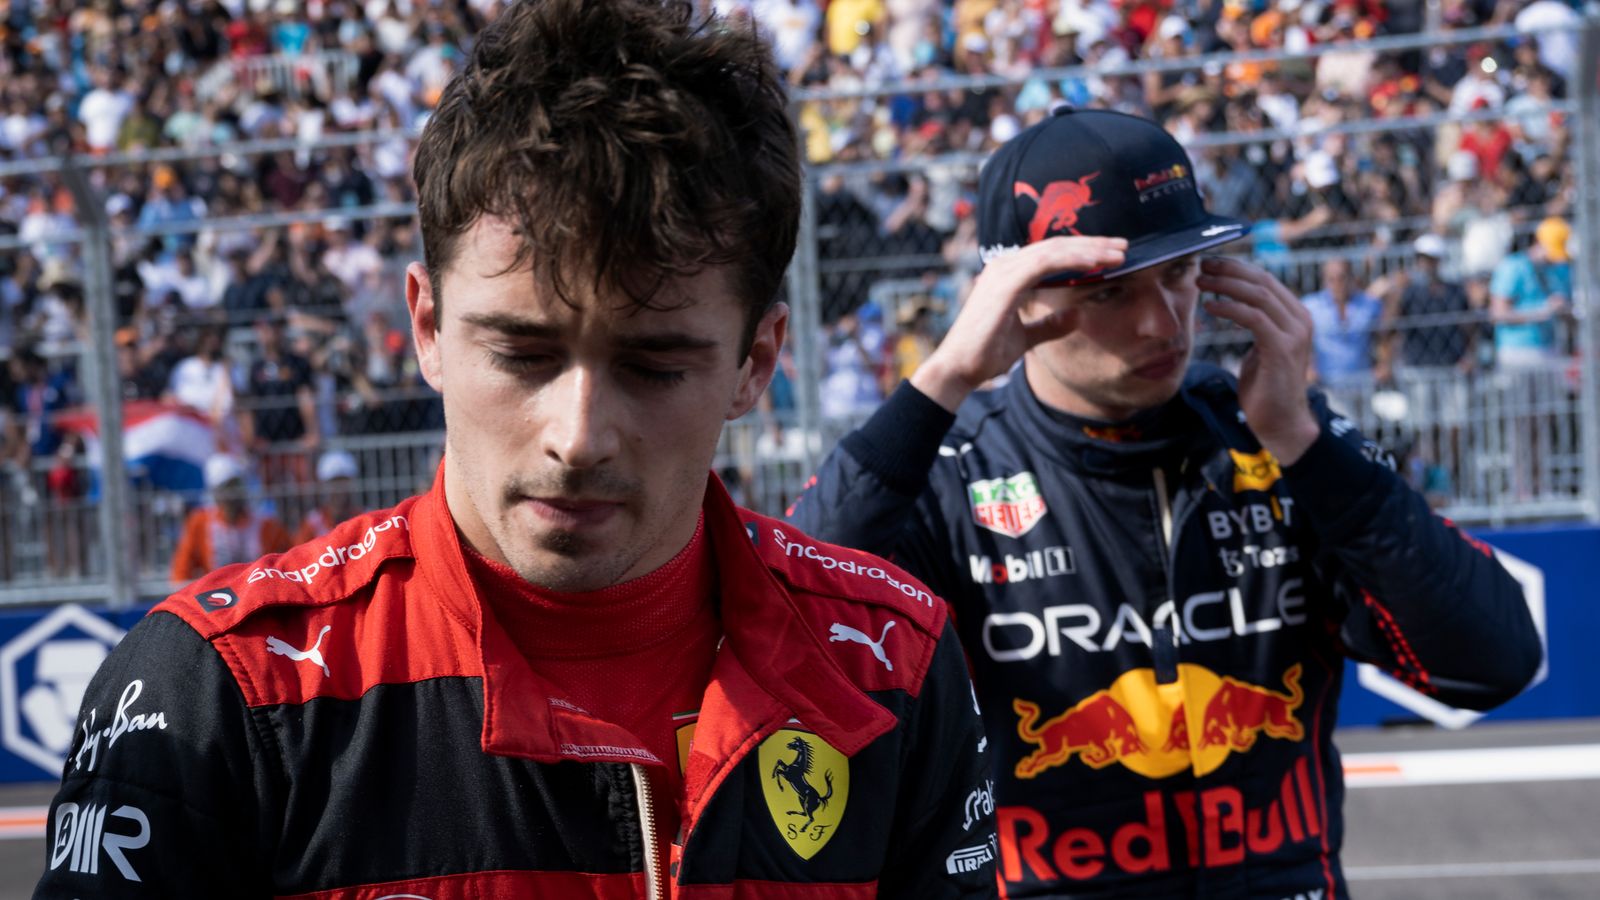 Max Verstappen vs Charles Leclerc: The gripping story and swinging momentum of F1’s new title duel